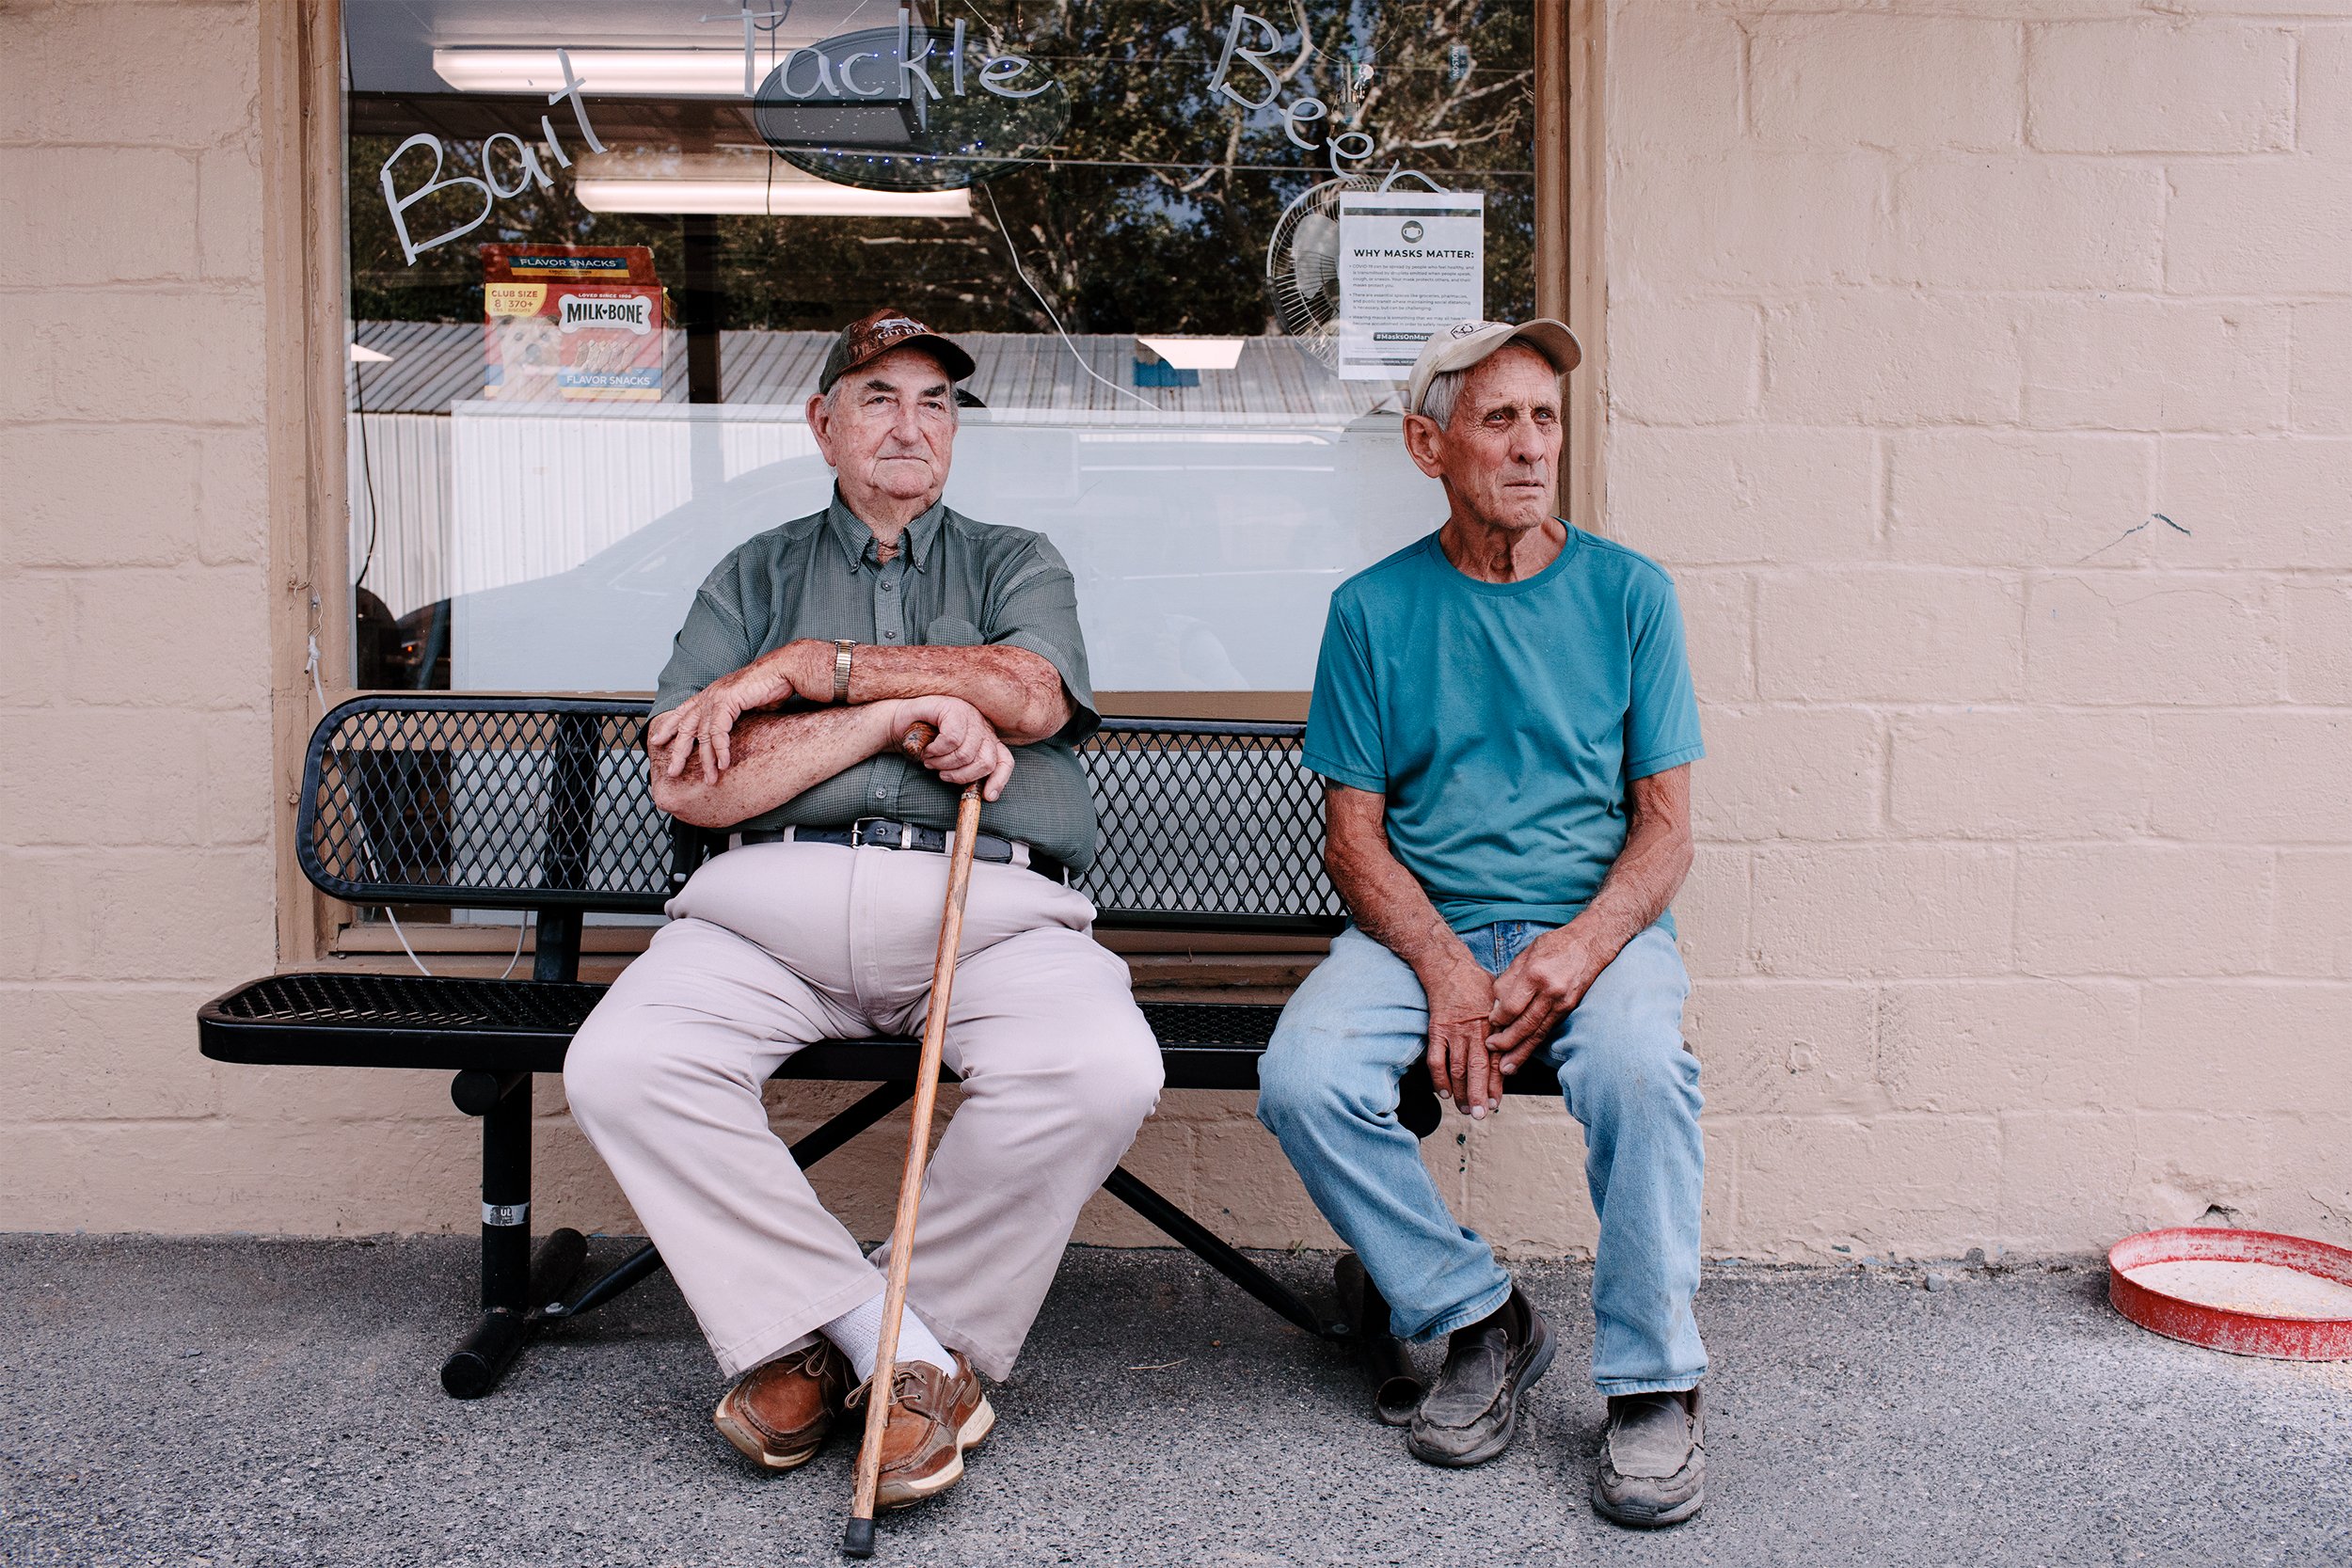  From left, Stanley Larrimore, 90, and John Kinnamon, 83, sit outside of Fairbank Tackle in Tilghman Island, where the local waterman community would pass time before and after fishing. Larrimore said it “used to be so full of people.” Larrimore star